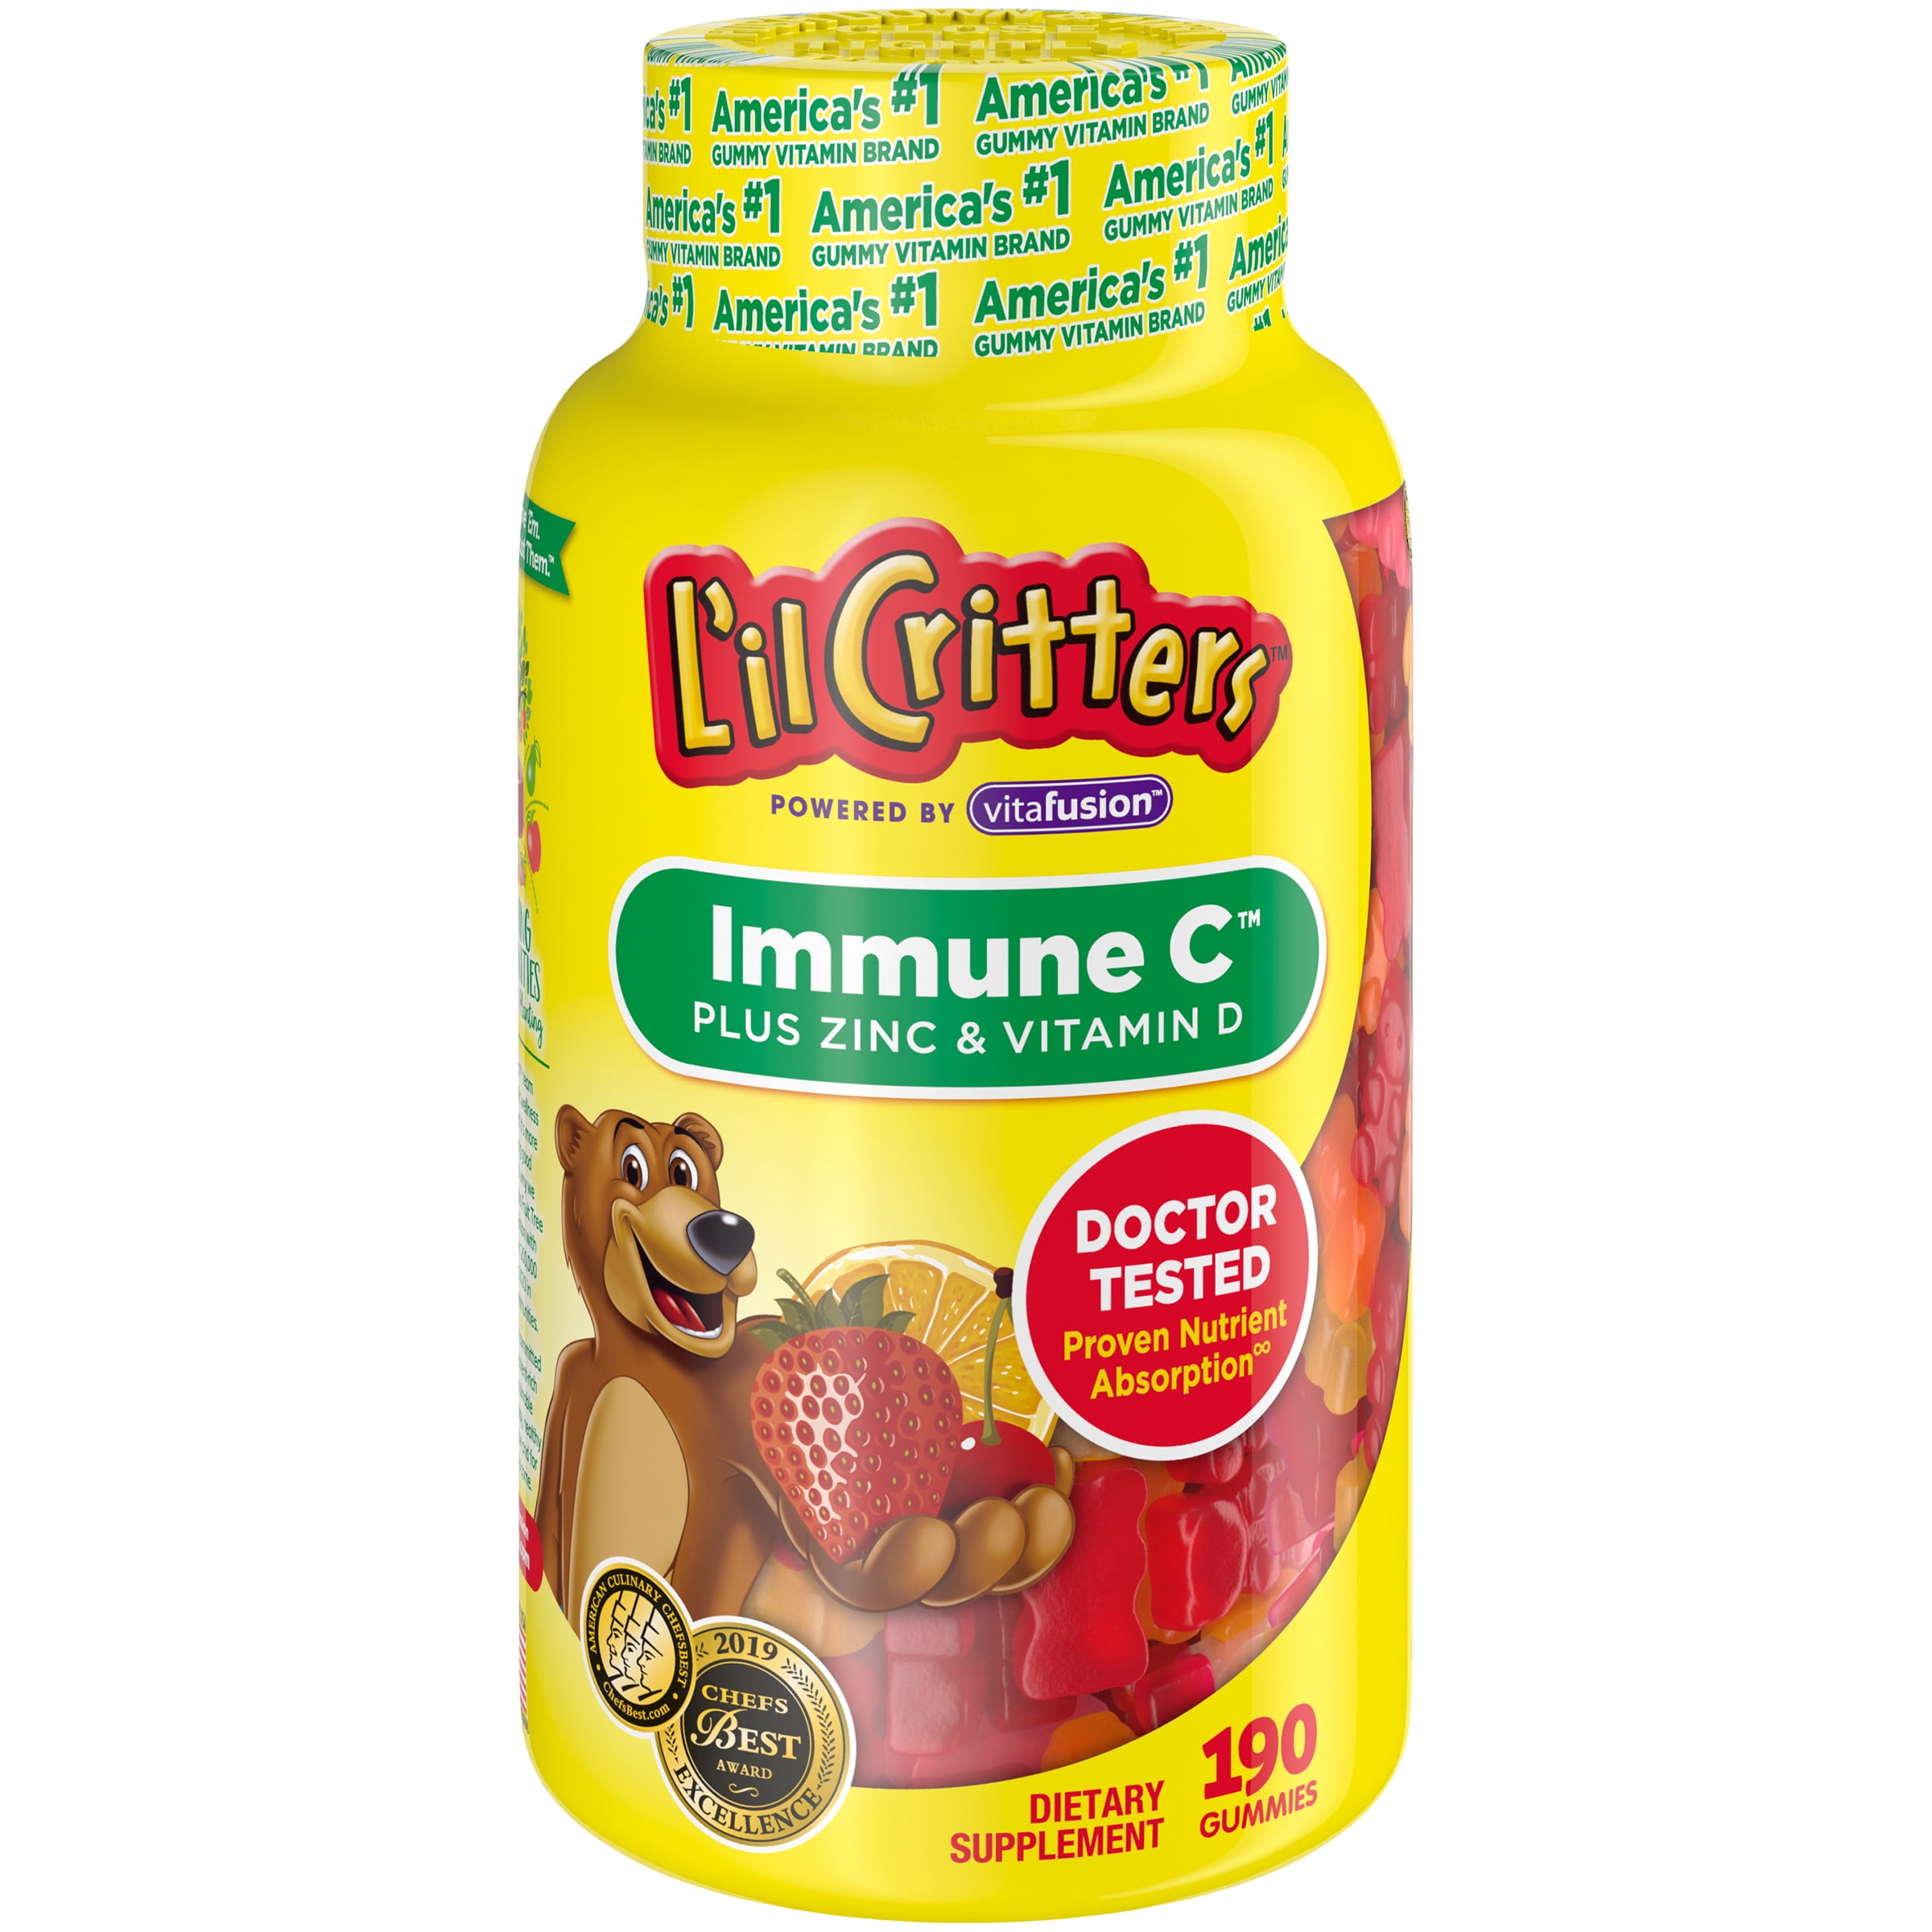 L'il Critters Kids Immune C Gummy Supplement with Vitamin Zinc and Vitamin D3 for Immune 190 ct (95-190 day supply), 4 delicious flavors from America's Number One Gummy Vitamin Brand -